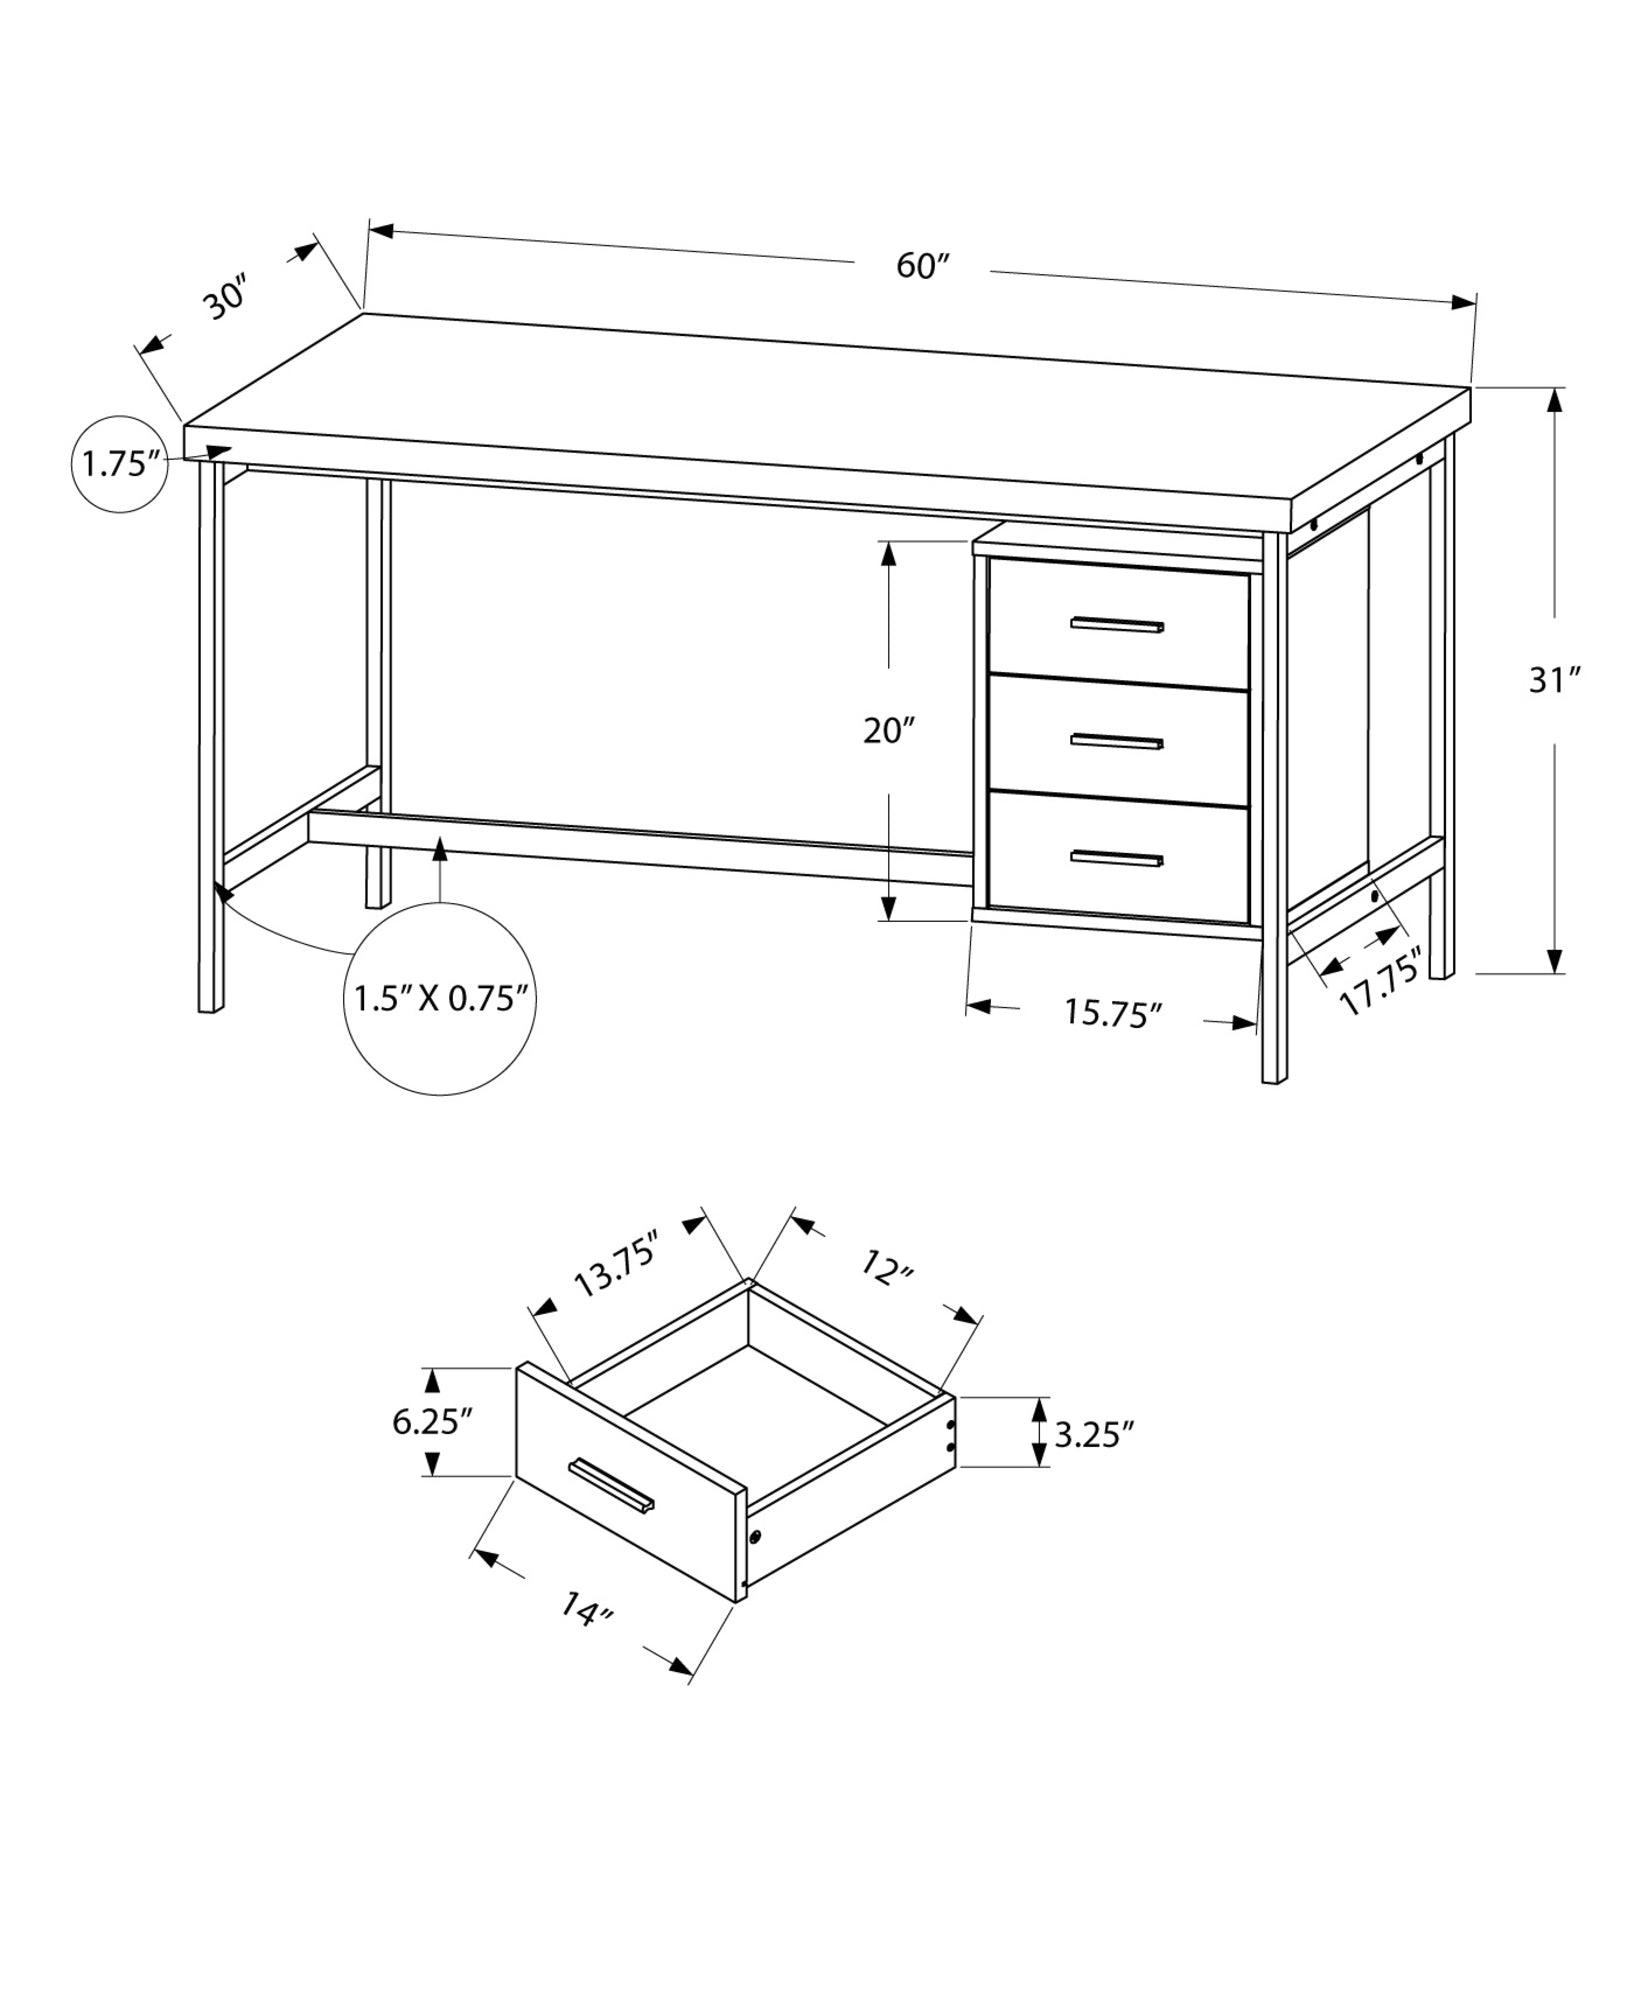 30" x 60" x 31" White Silver Particle Board Hollow Core Metal Computer Desk With A Hollow Core - AFS